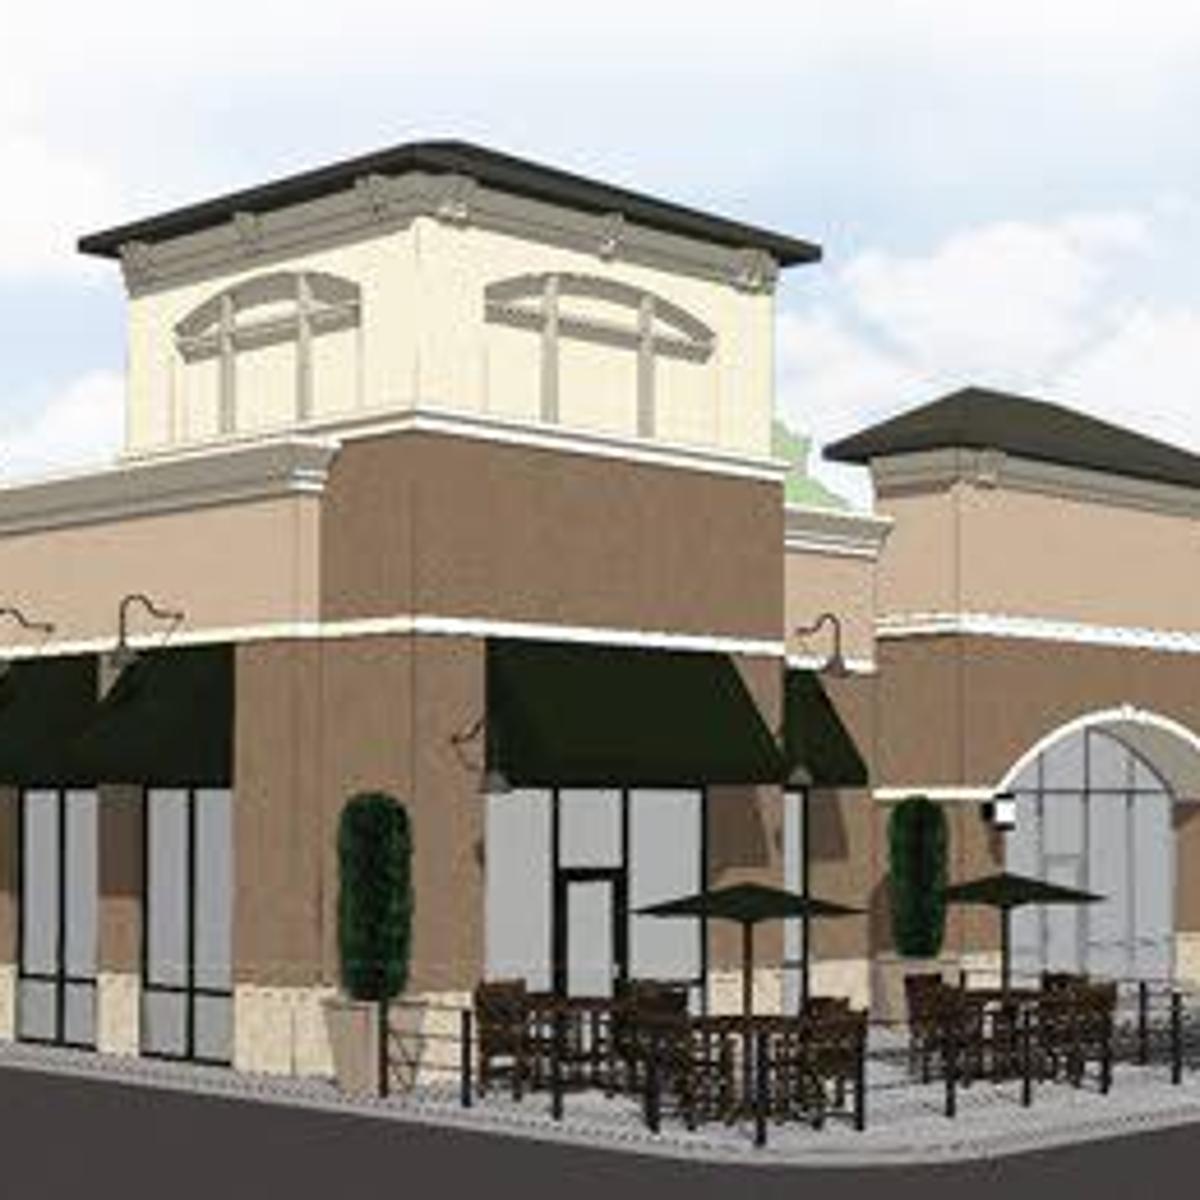 National Chains To Occupy New Strip Mall In Village News